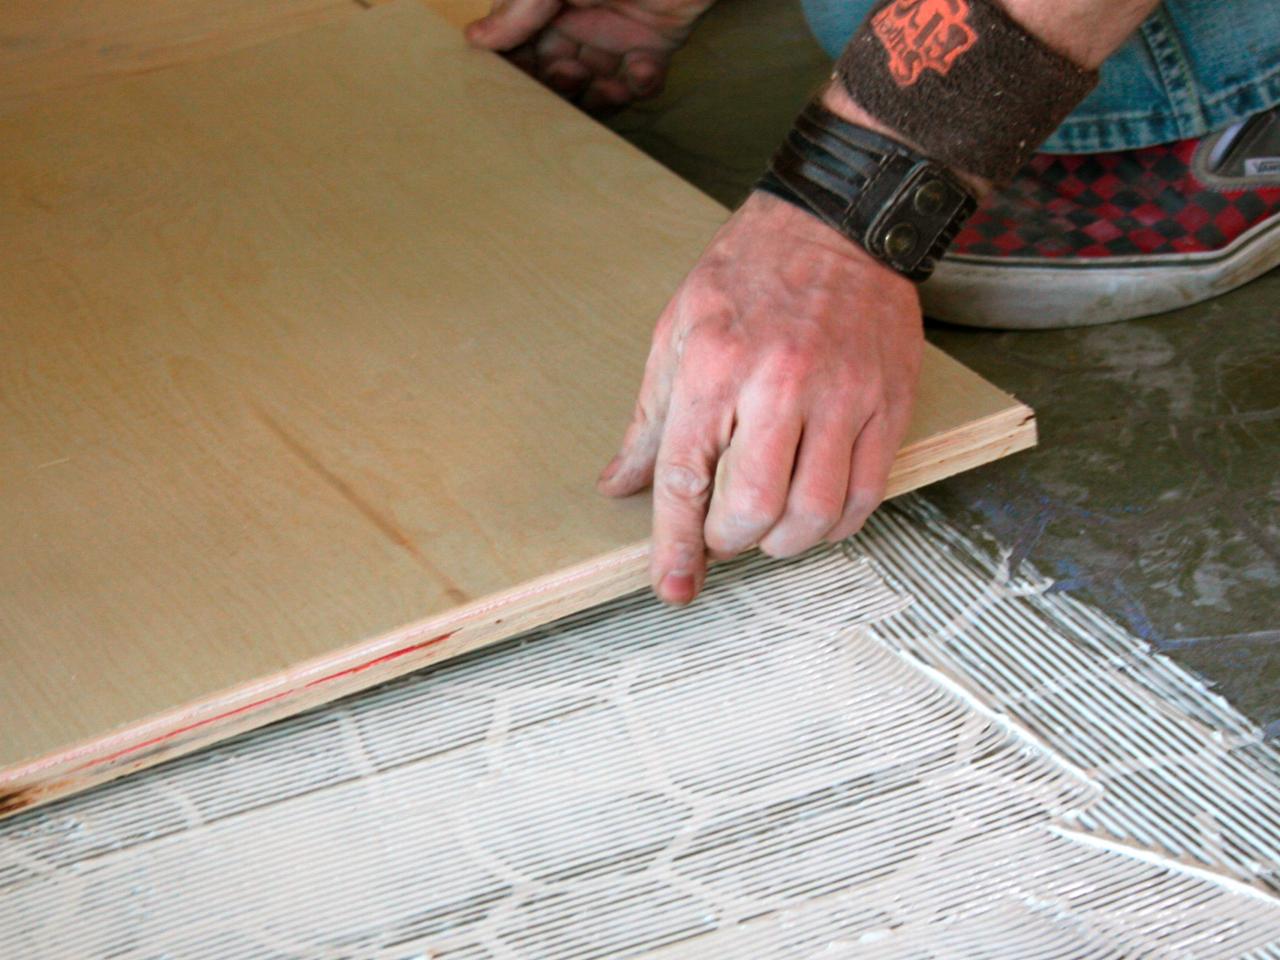 How To Install Plywood Floor Tiles, Can You Tile Over Plywood